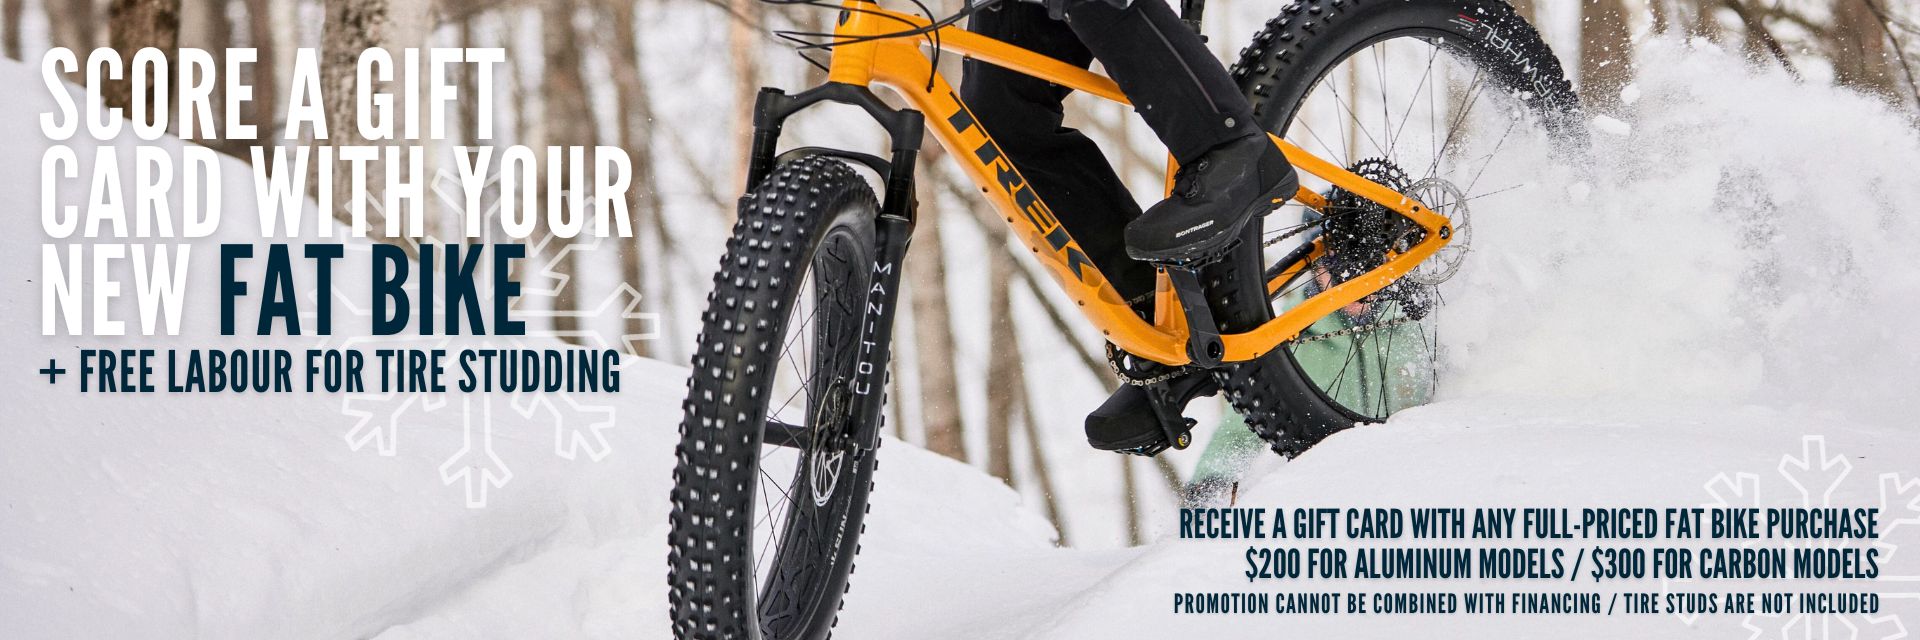 score a gift card with your new fat bike